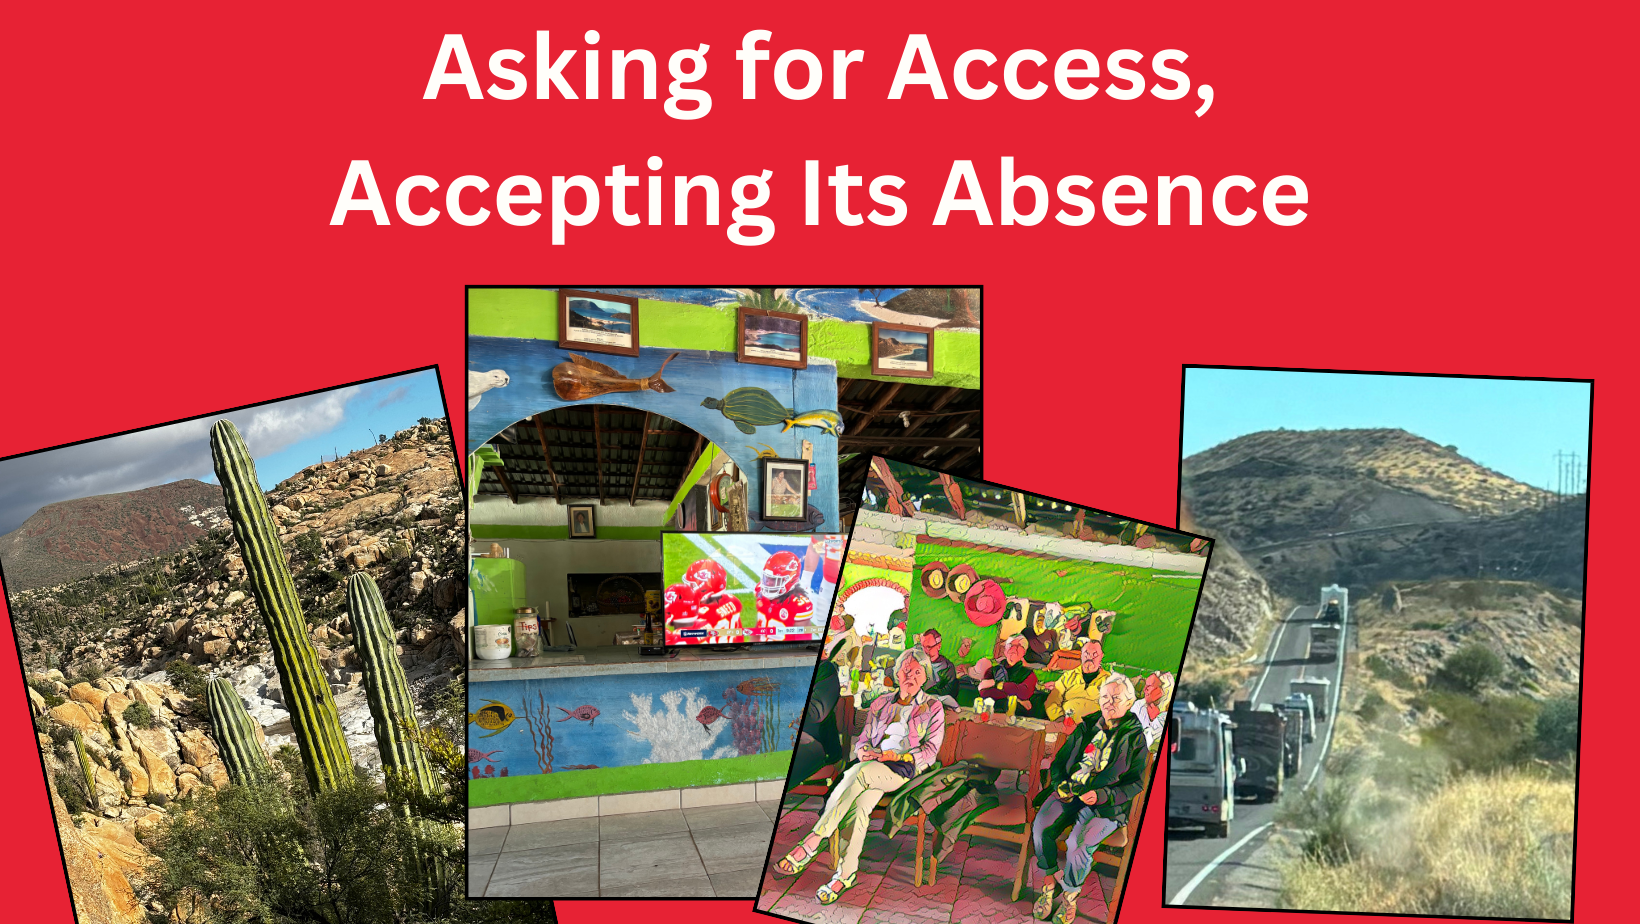 Featured image for “Asking for Access, Accepting Its Absence”